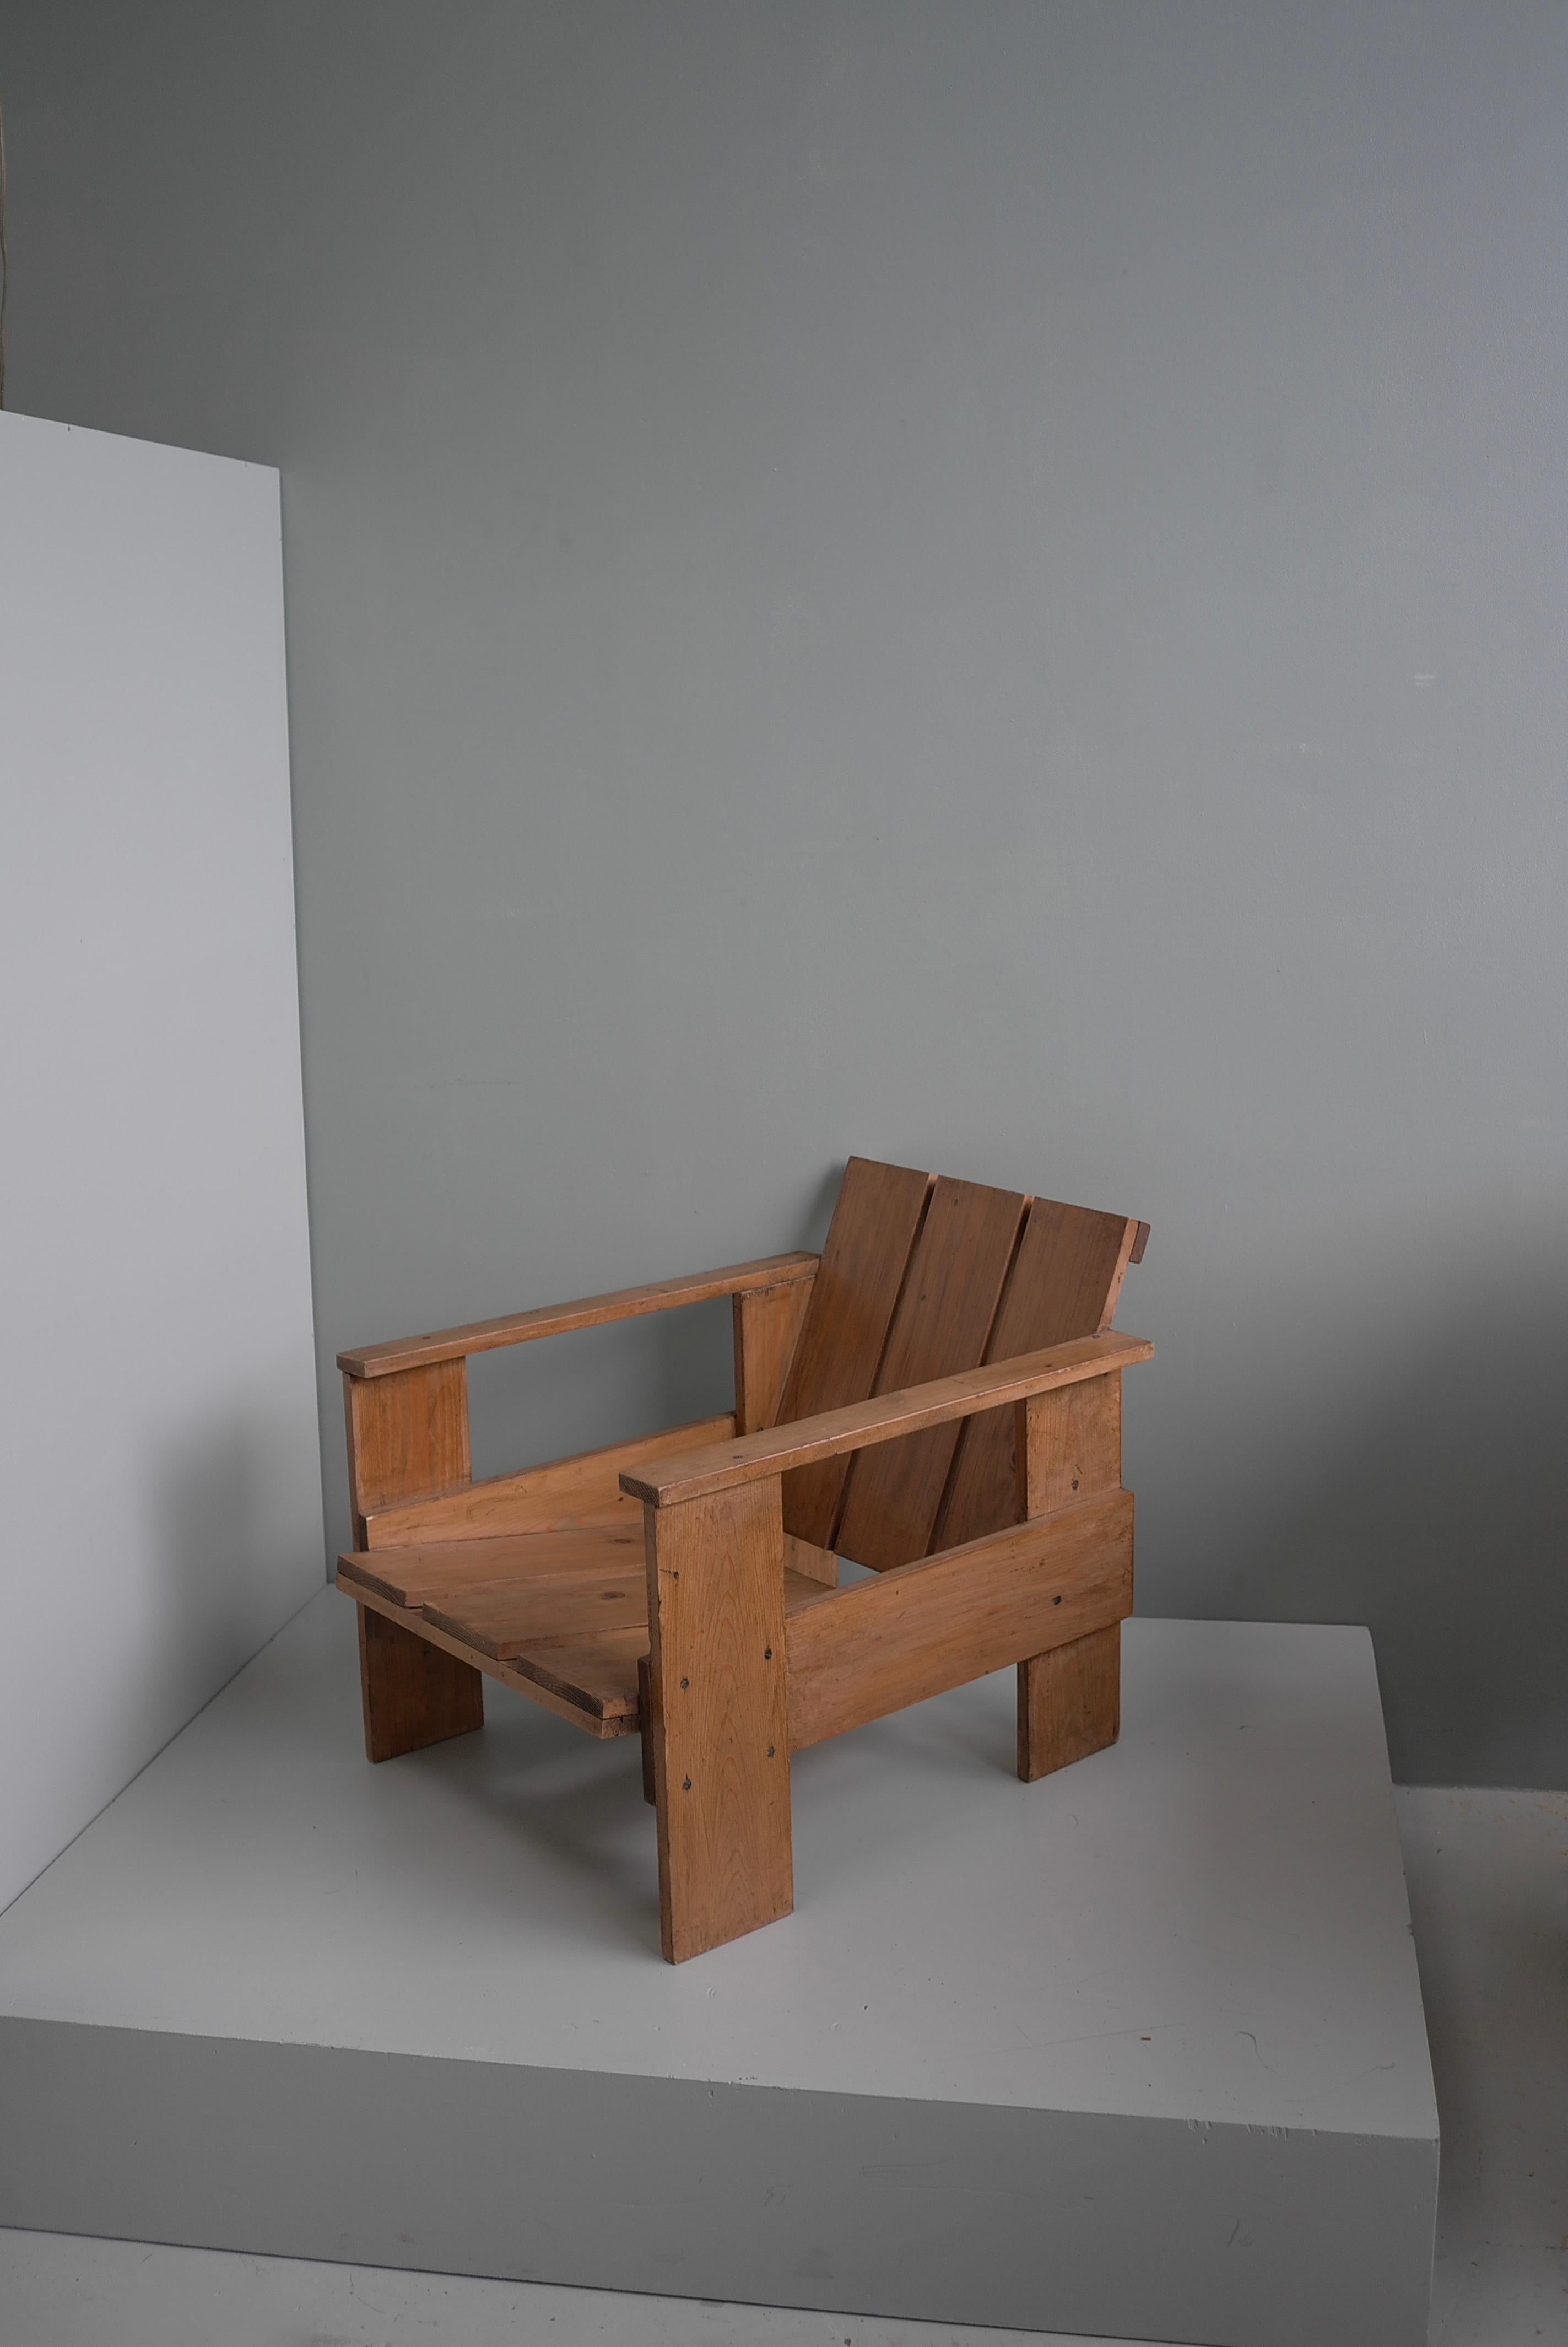 Crate Chair in style of Gerrit Rietveld, The Netherlands 1960's For Sale 5